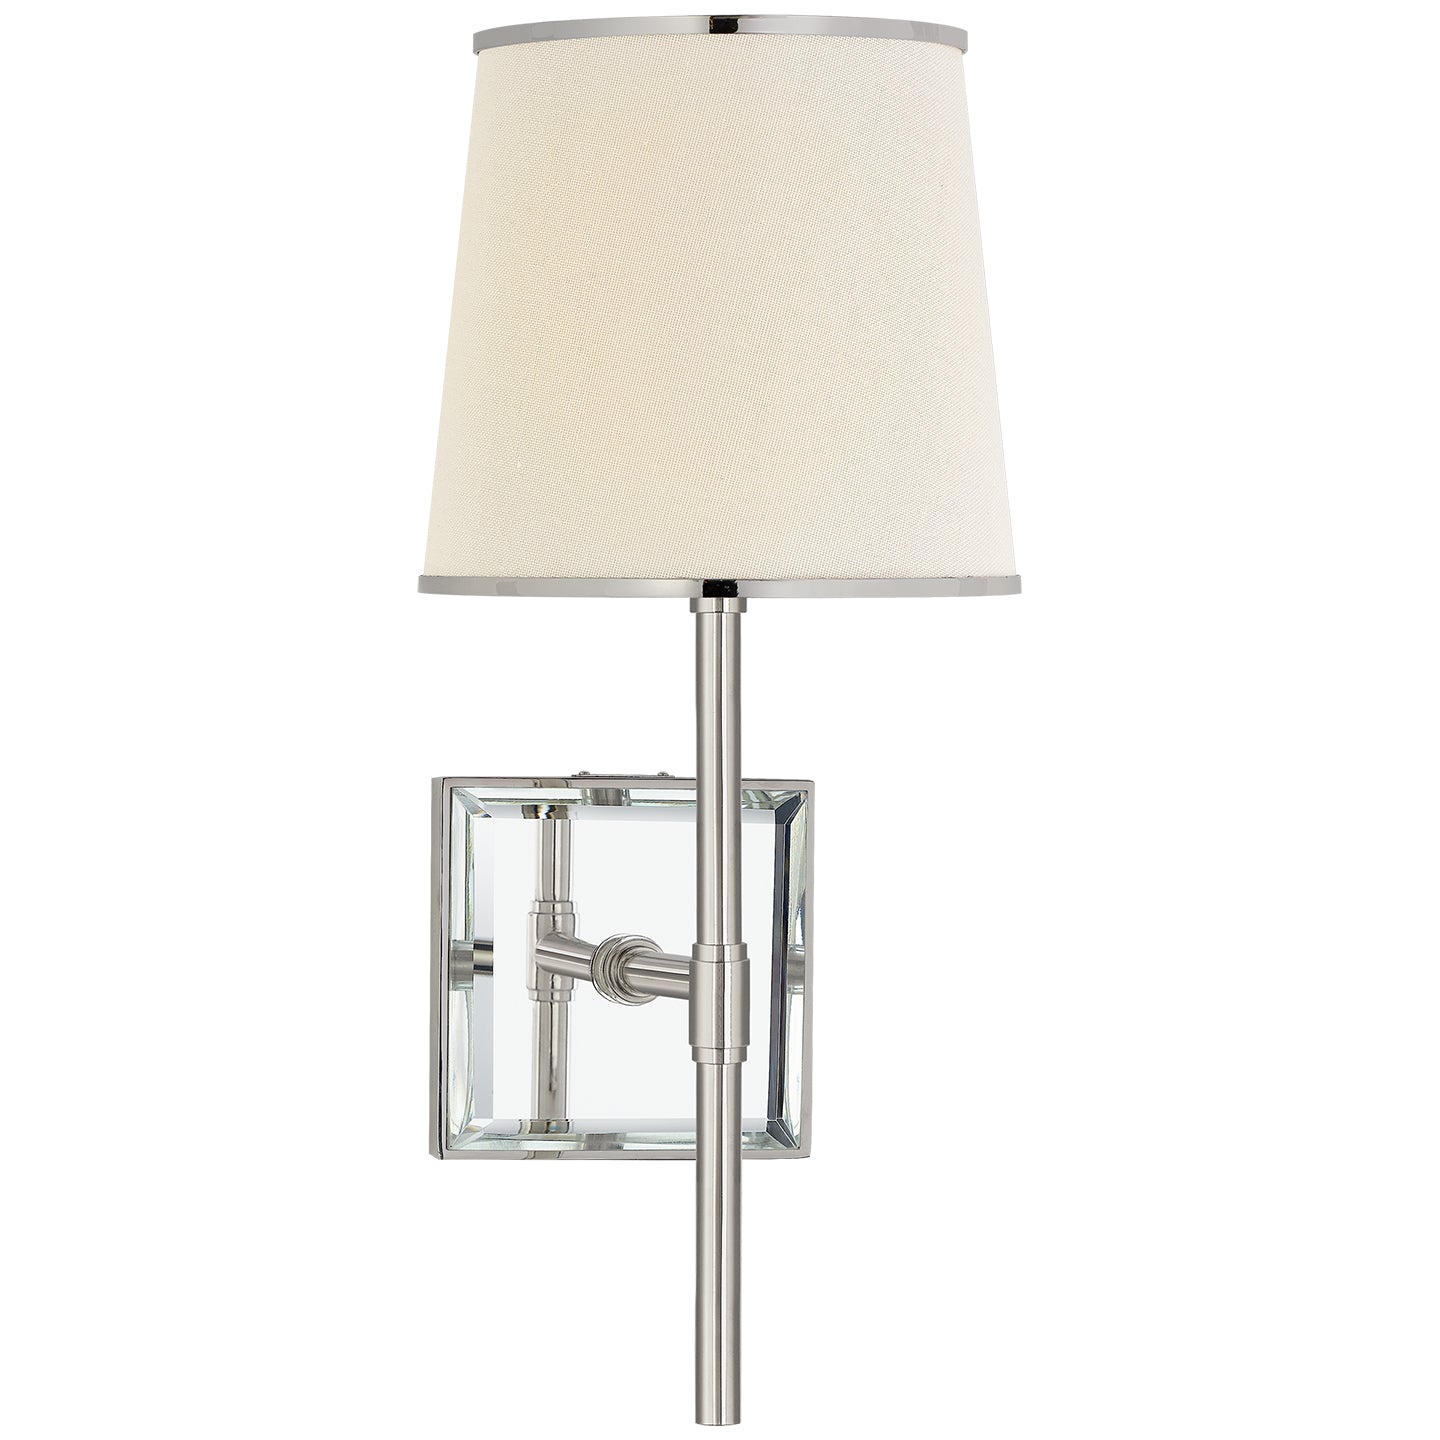 Load image into Gallery viewer, Visual Comfort Signature - KS 2120PN/MIR-L/PN - One Light Wall Sconce - Bradford - Polished Nickel and Mirror
